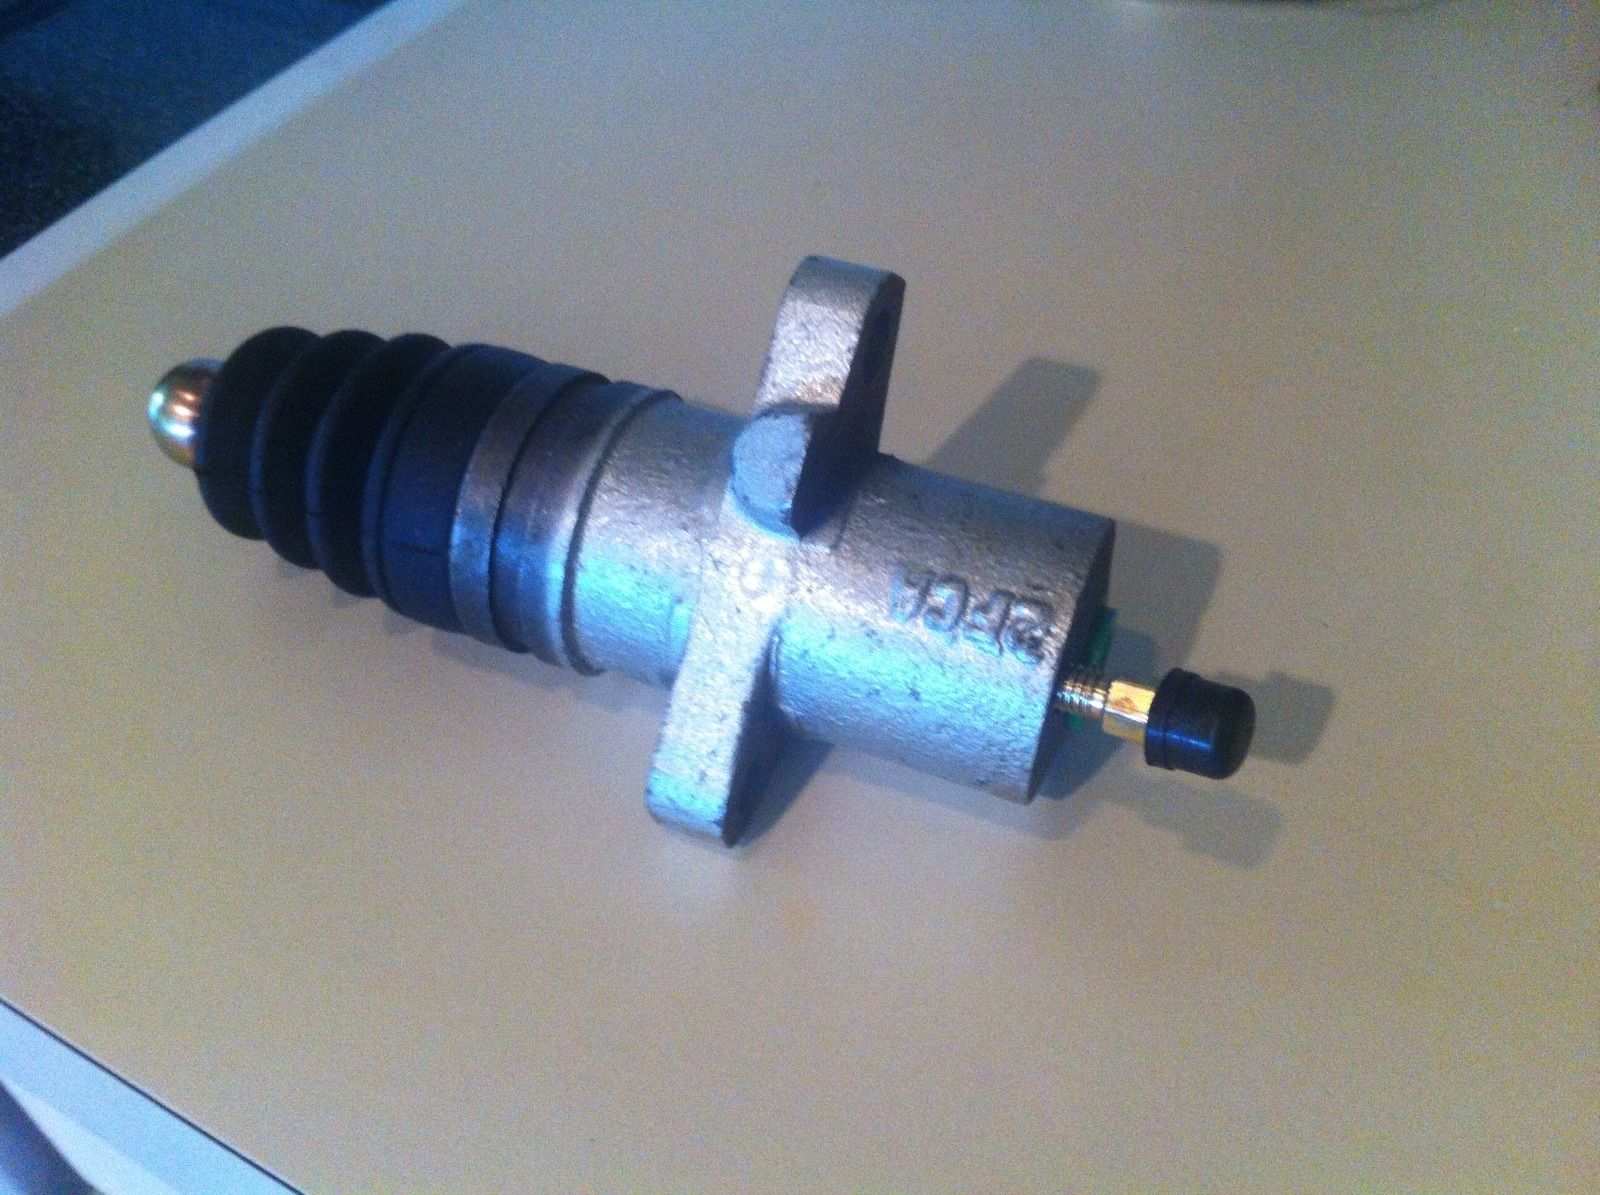 Clutch cilinder (slave), suitable for ZF gearbox